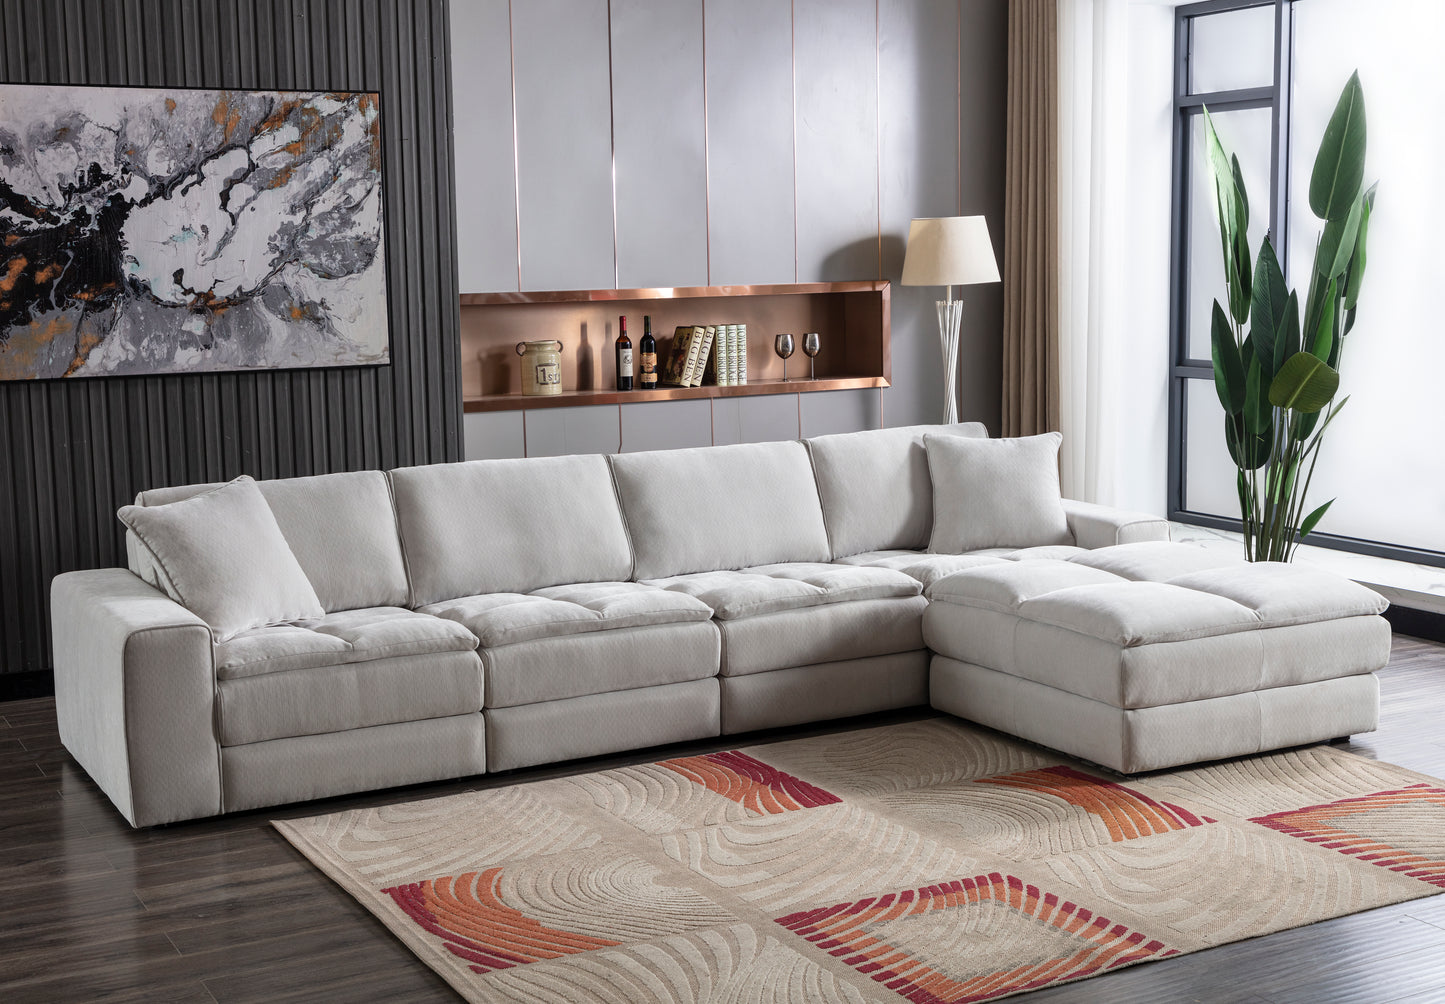 Breton Contemporary Fabric Tufted 5 Piece Sectional Sofa, Oyster